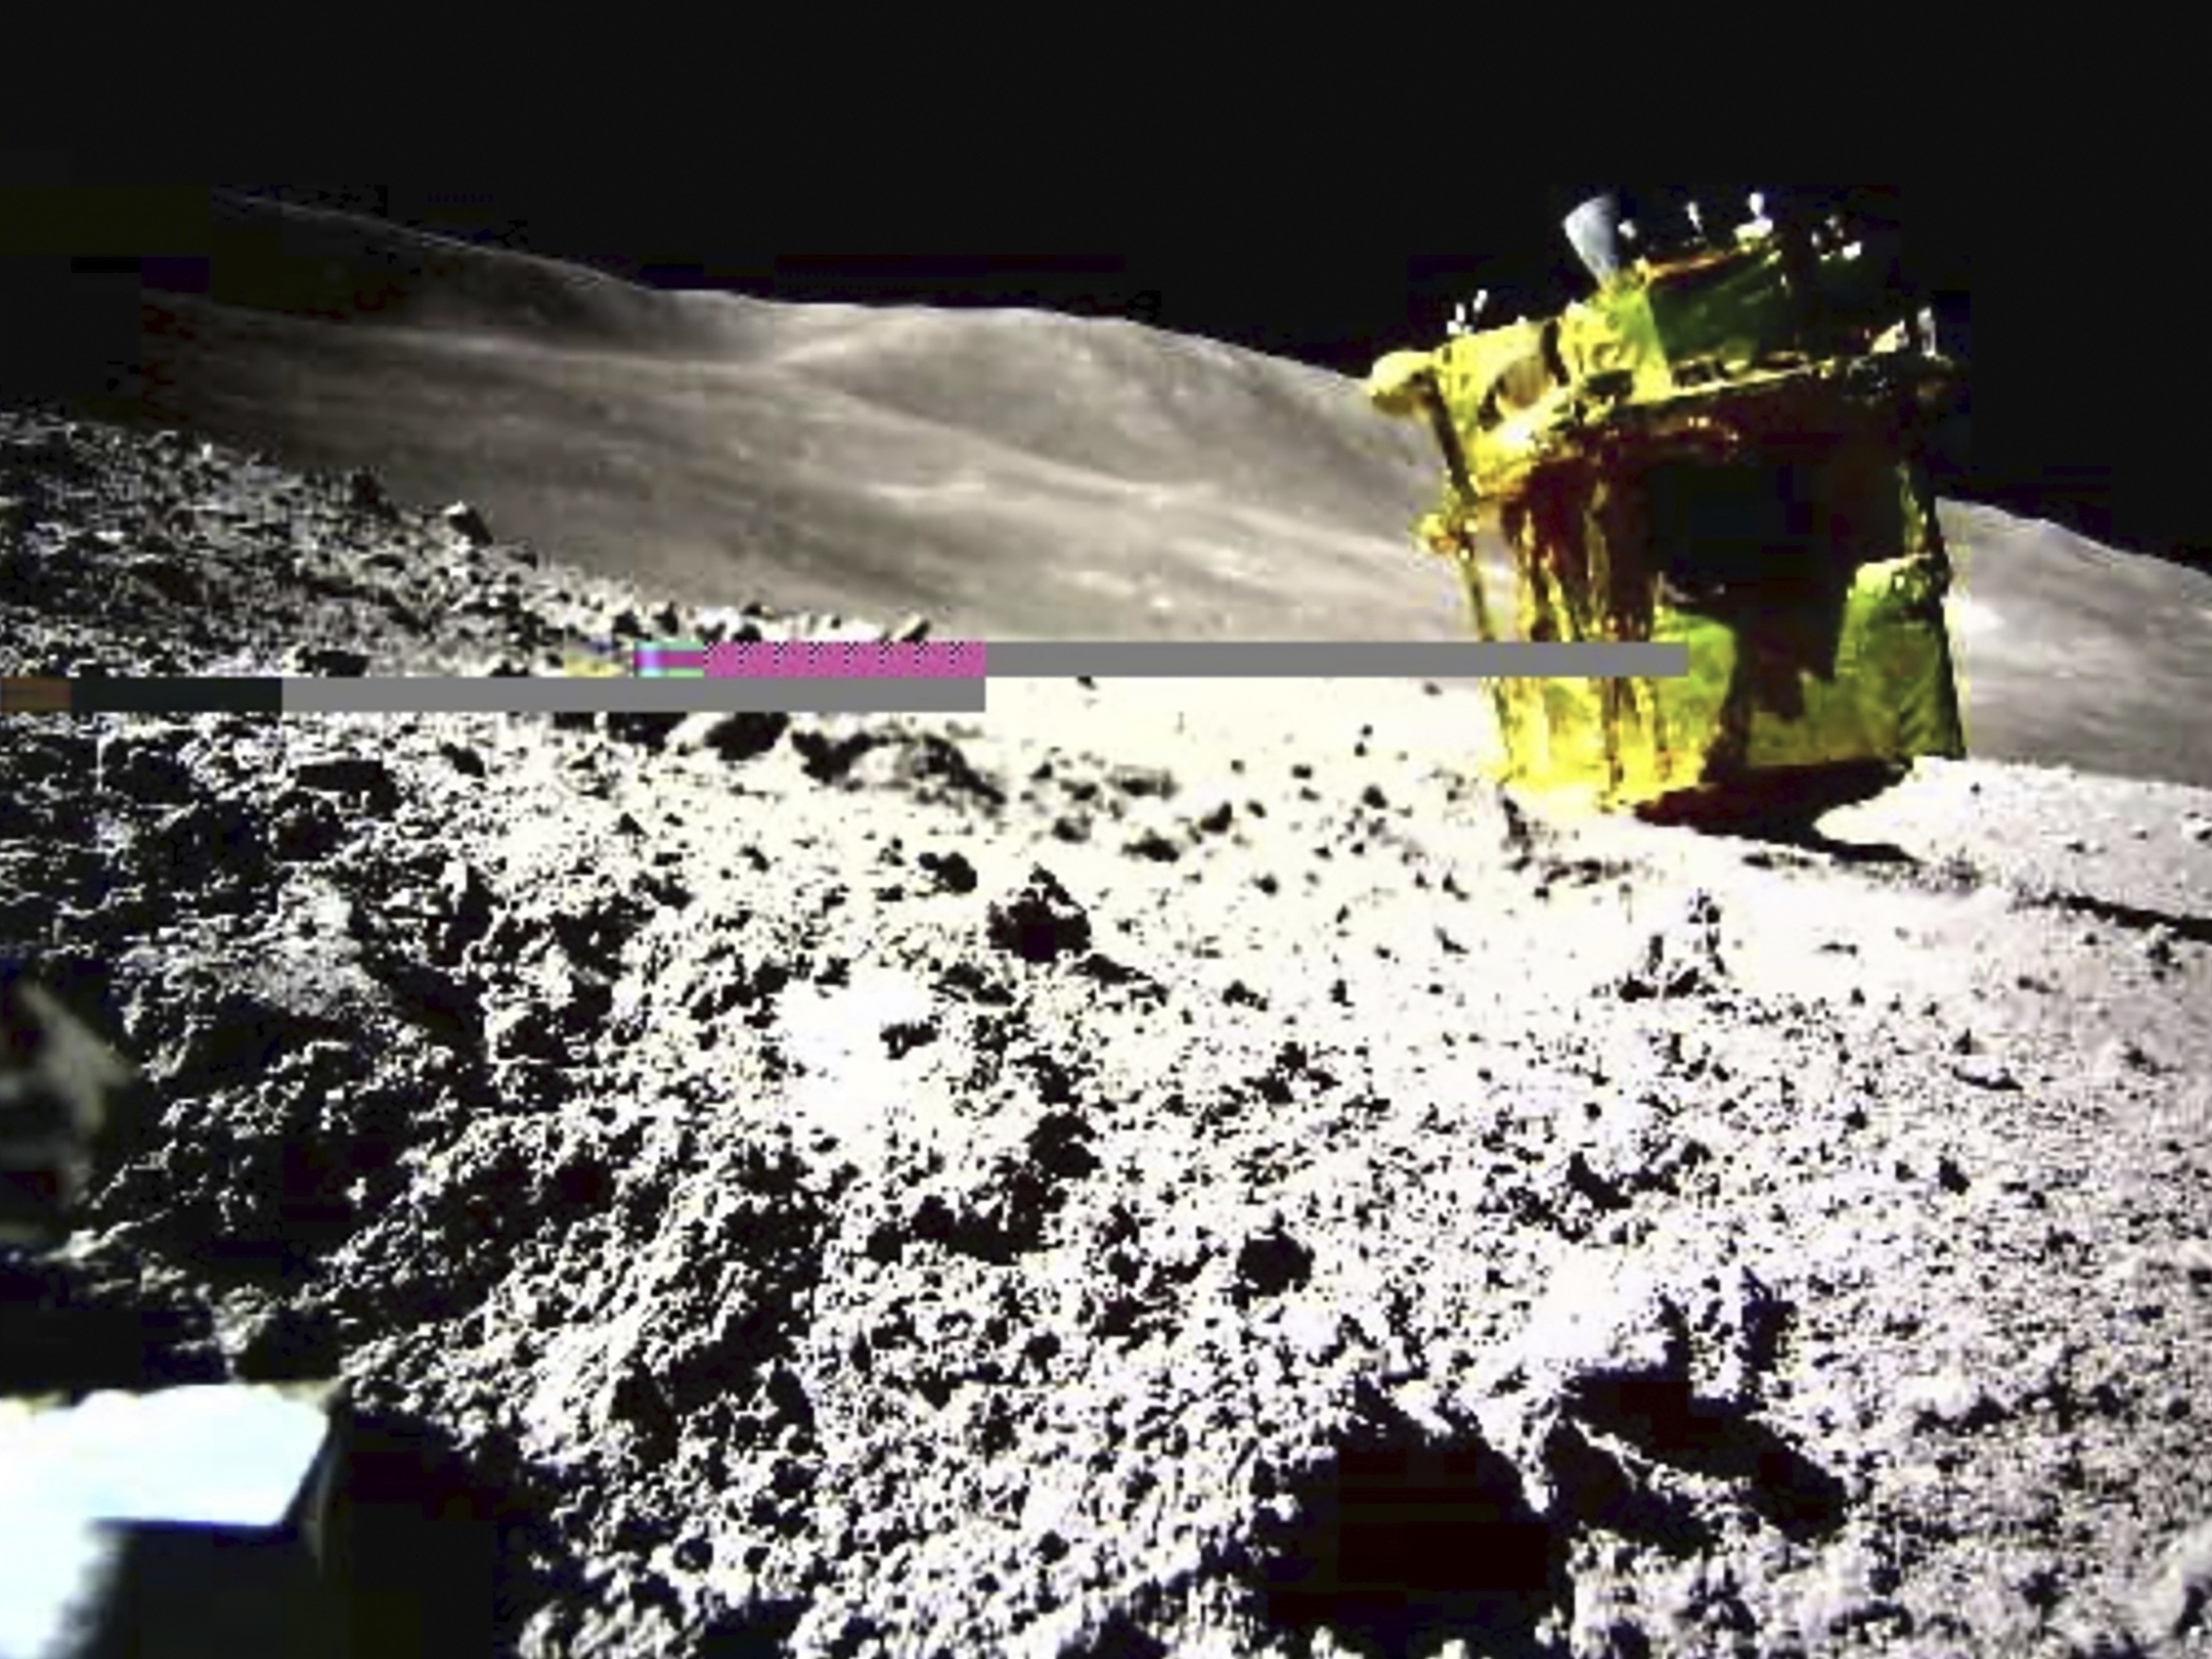 Japan’s space agency says it may now have clues about the origins of the moon